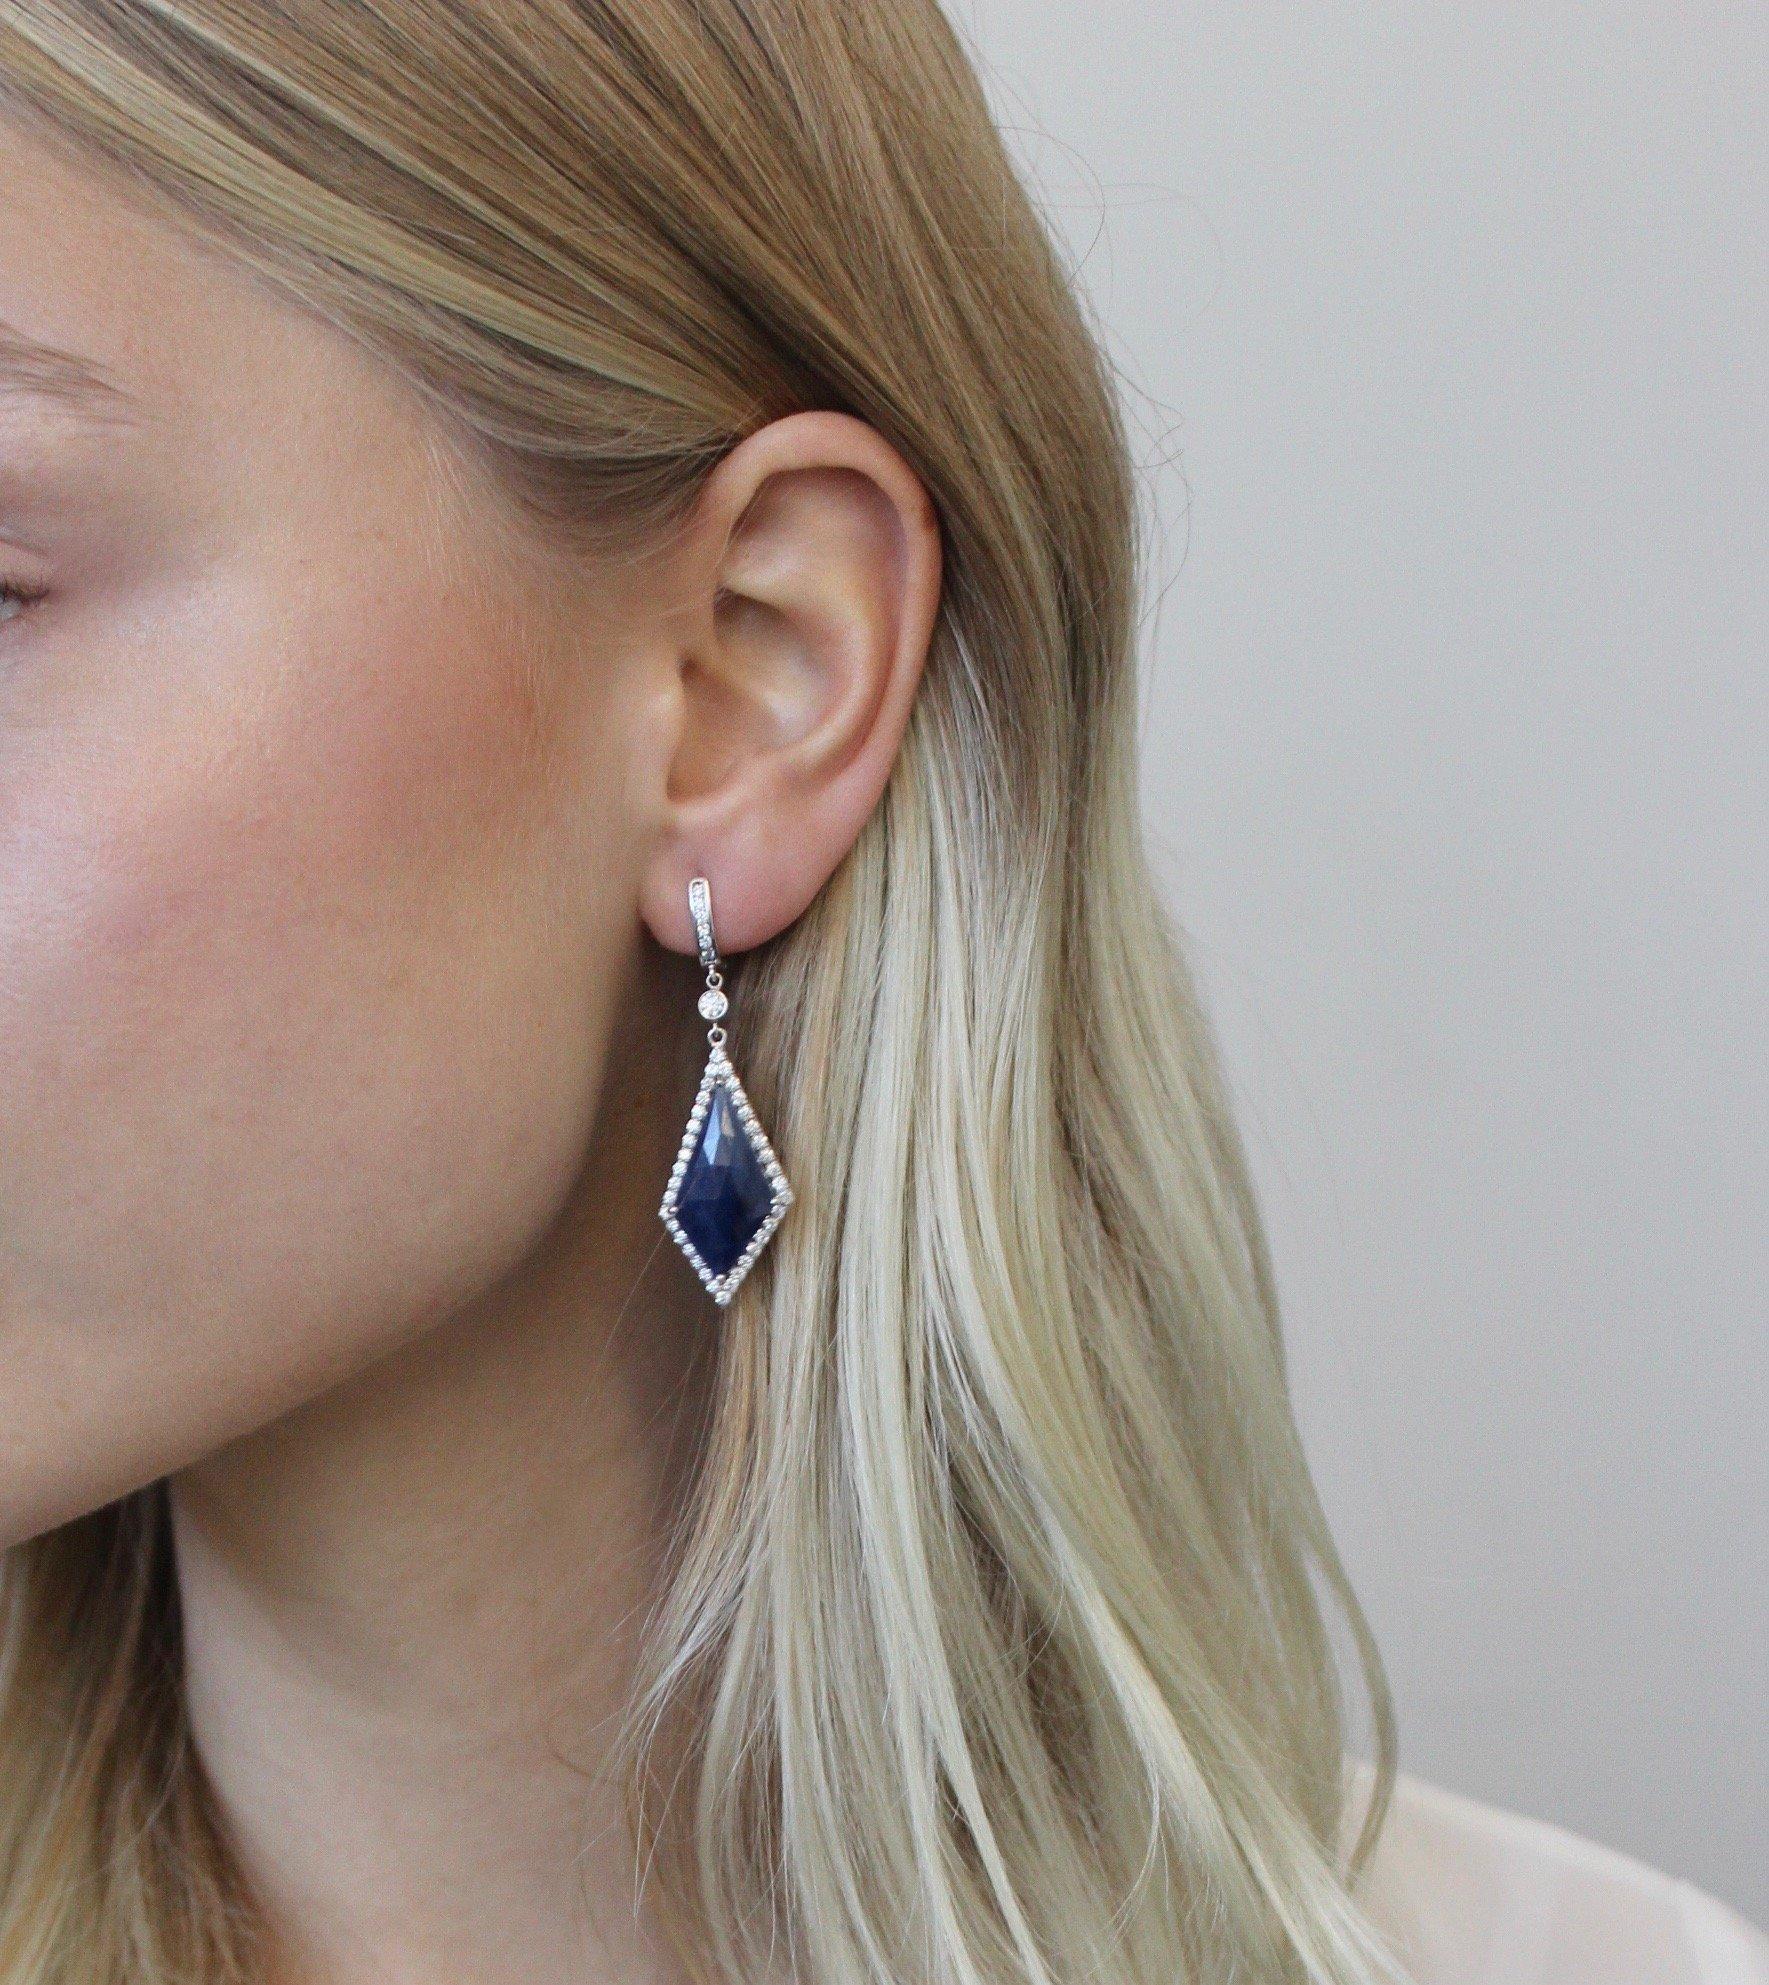 Be fun - Be different
These kite shape blue sapphire earrings let you play with color.
Fancy event or a daily wear they're so versatile.
Hand made in Los Angeles with top quality diamonds and manufacturing